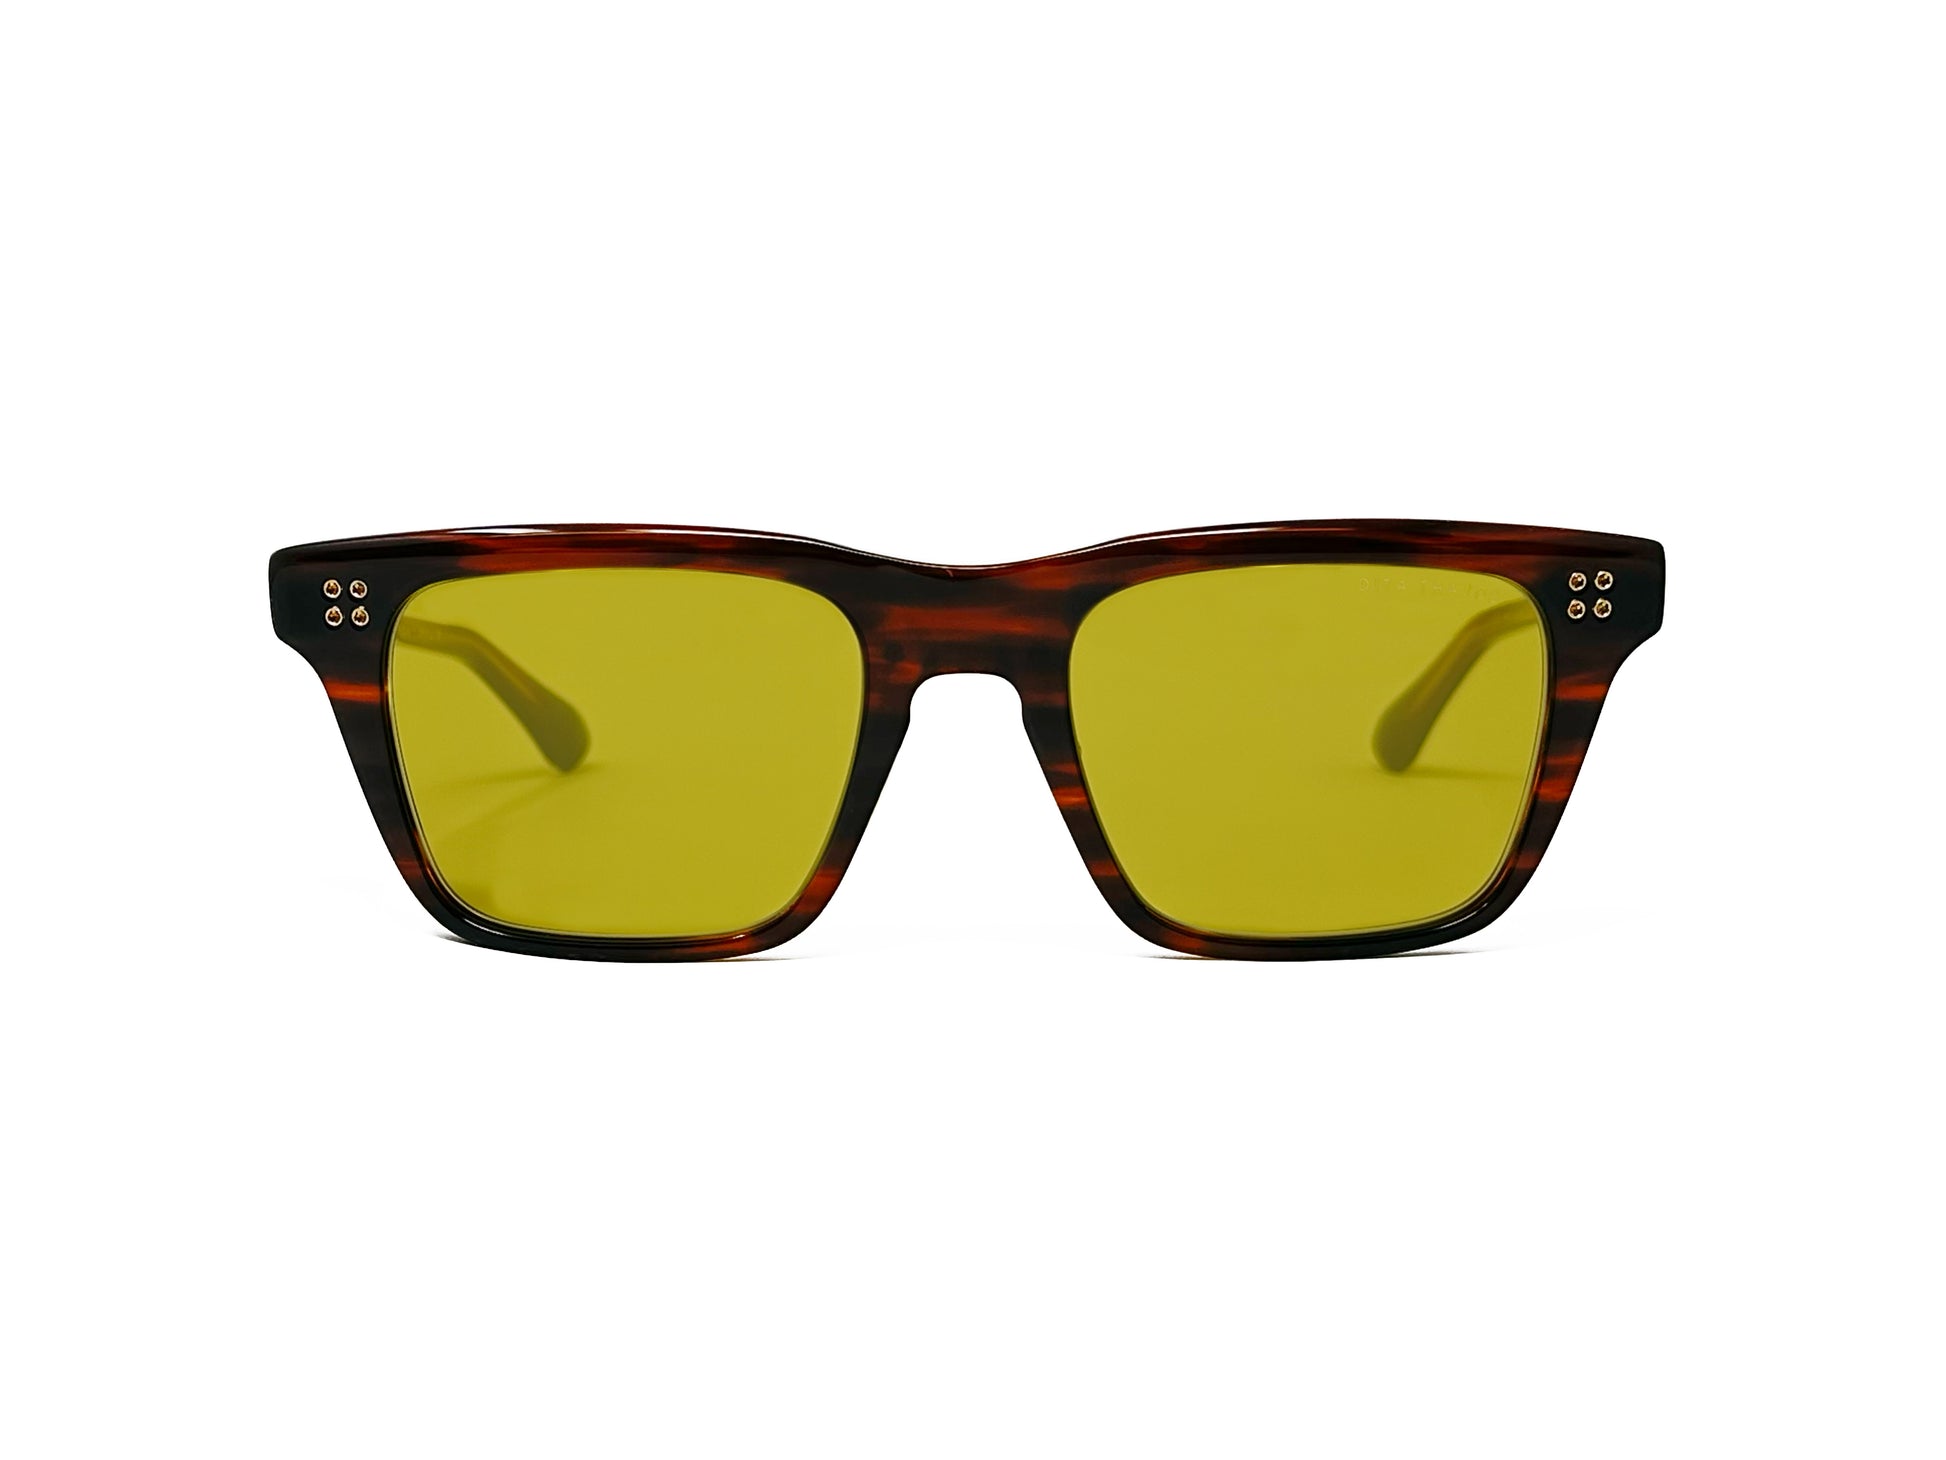 Dita rectangular acetate sunglass with four metal dot embellishment on each corner. Model: Thavos. Color: 02 - Reddish brown swirll with greenish-yellow lenses. Front view. 